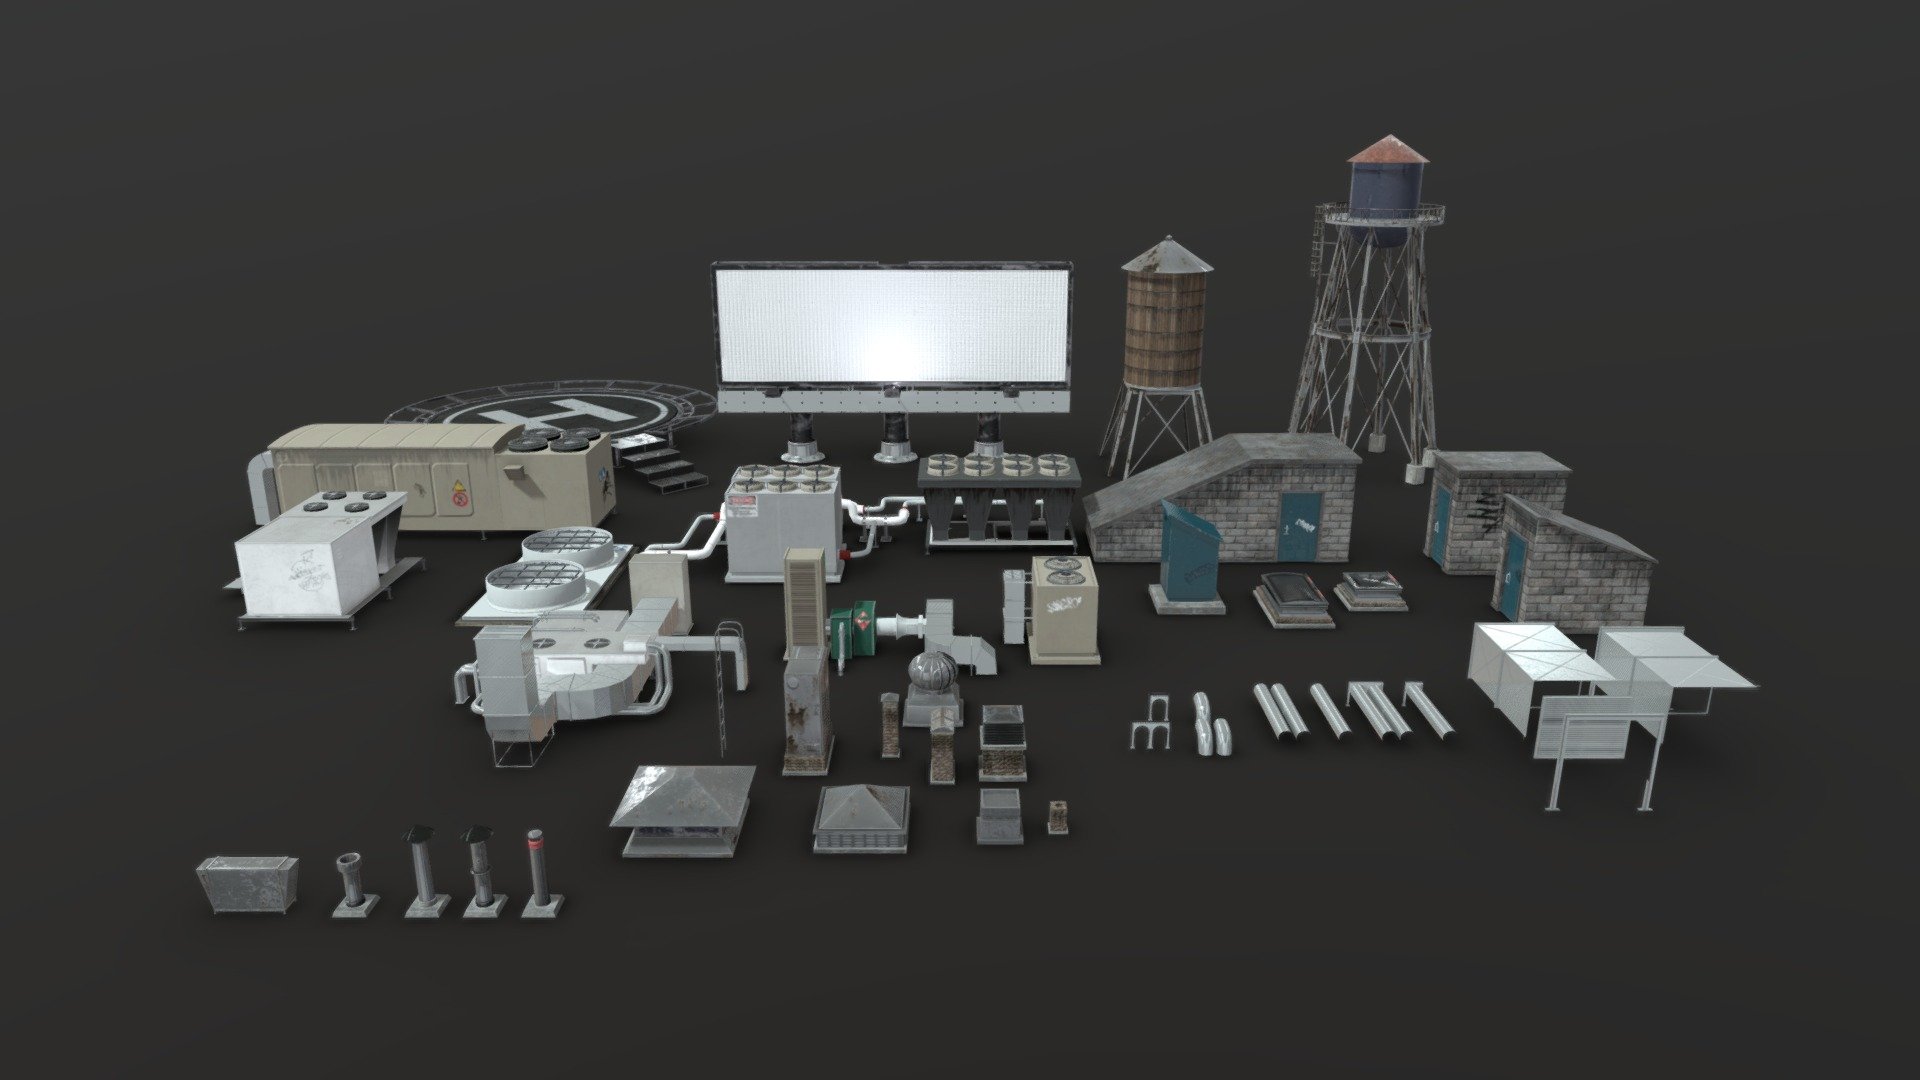 Features:

All materials have: base color, normal and an ORM packed texture (R-Occlusion, B-Roughness, G-Metallic).
The showcase scene is included.

Number of Unique Meshes: 63 Static Meshes

Collision: (Yes | custom and automatically generated)

Vertex Count: 230 643

LODs: (No)

Number of Materials and Material Instances: 1 master materials and 7 material instances.

Number of Textures: 23 Textures (4096x4096).
Texture Resolutions: (4096x4096)) - Rooftop Props - 3D model by antoineallardchoquette 3d model